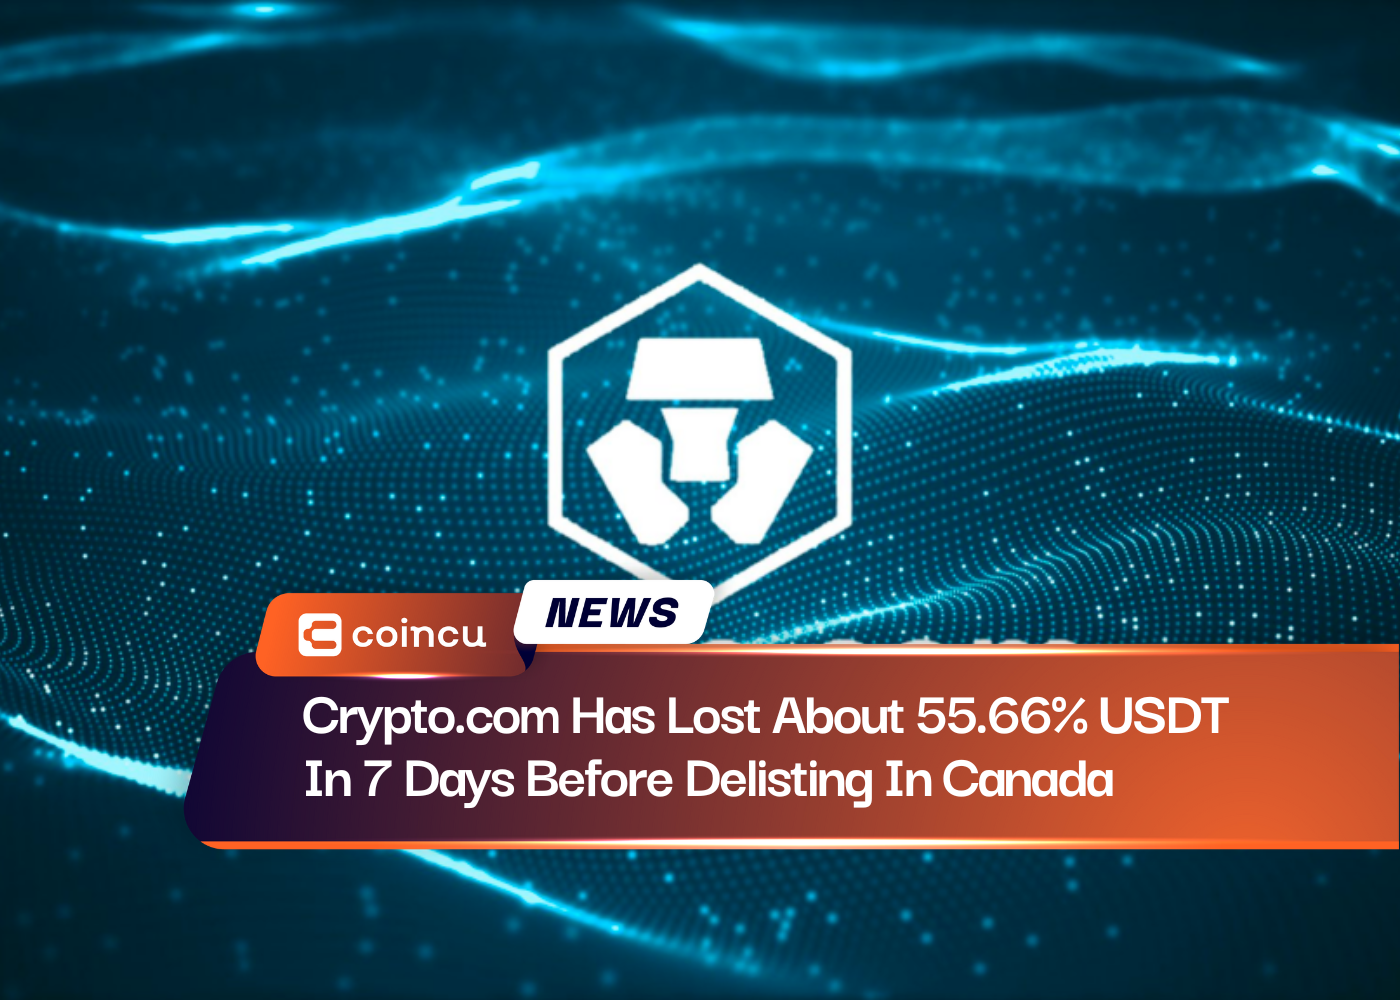 Crypto.com Has Lost About 55.66% USDT In 7 Days Before Delisting In Canada